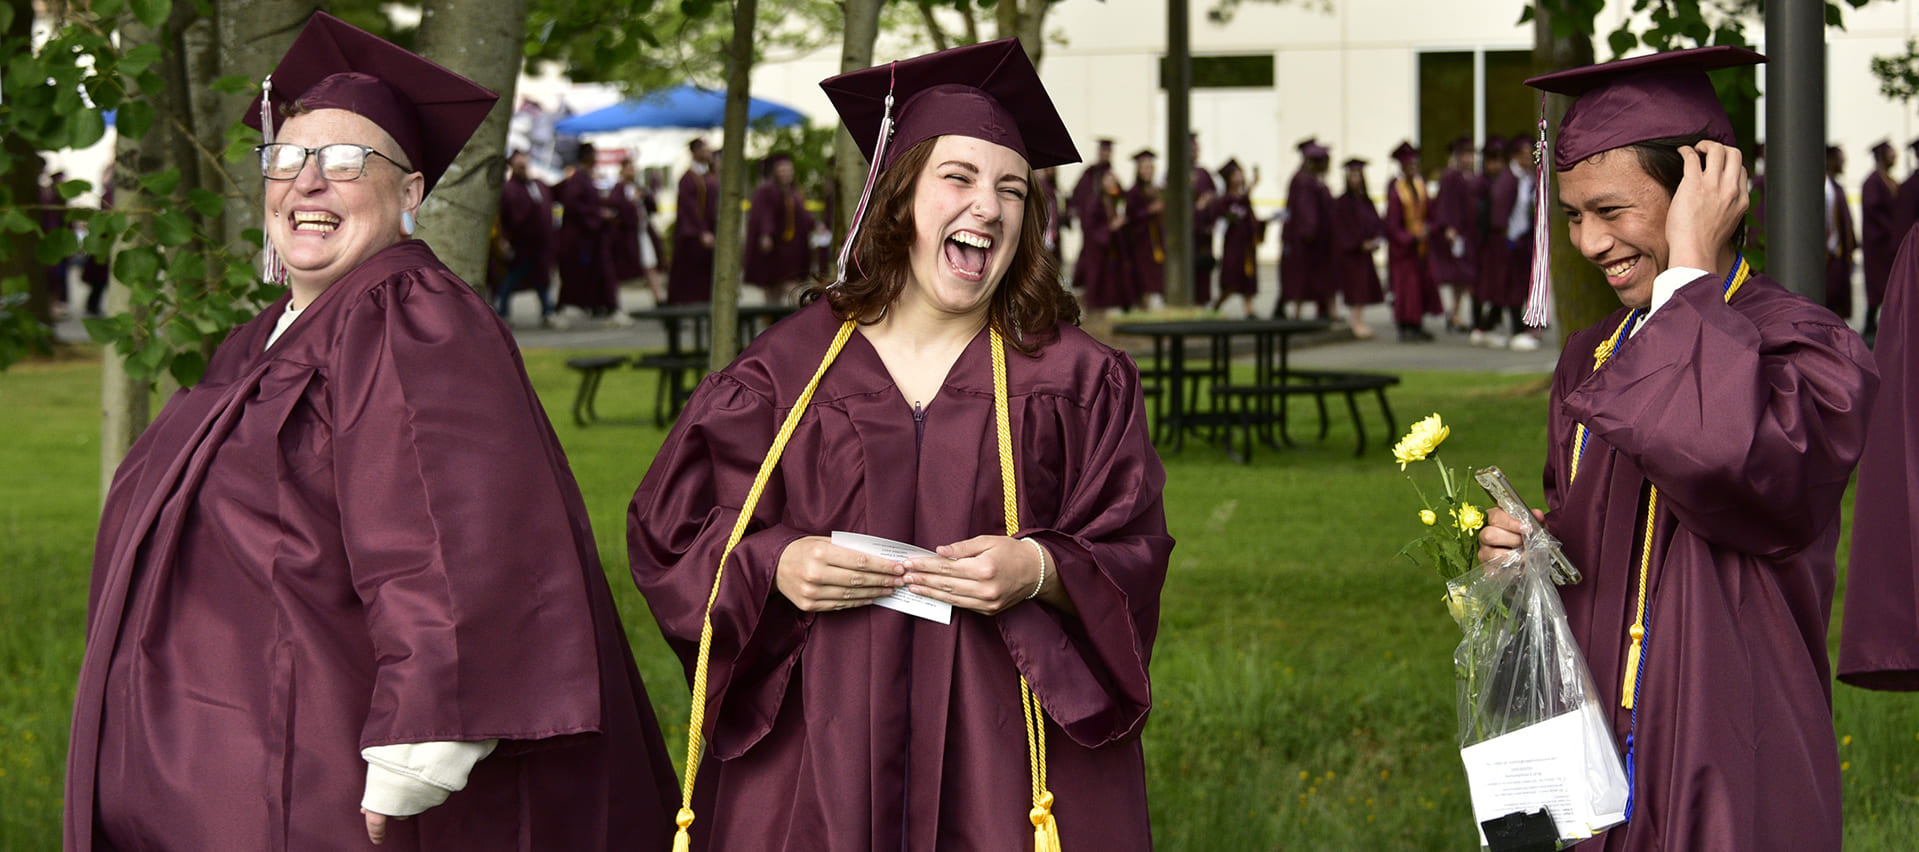 WCC graduates smiling while in line to walk the stage during commencement